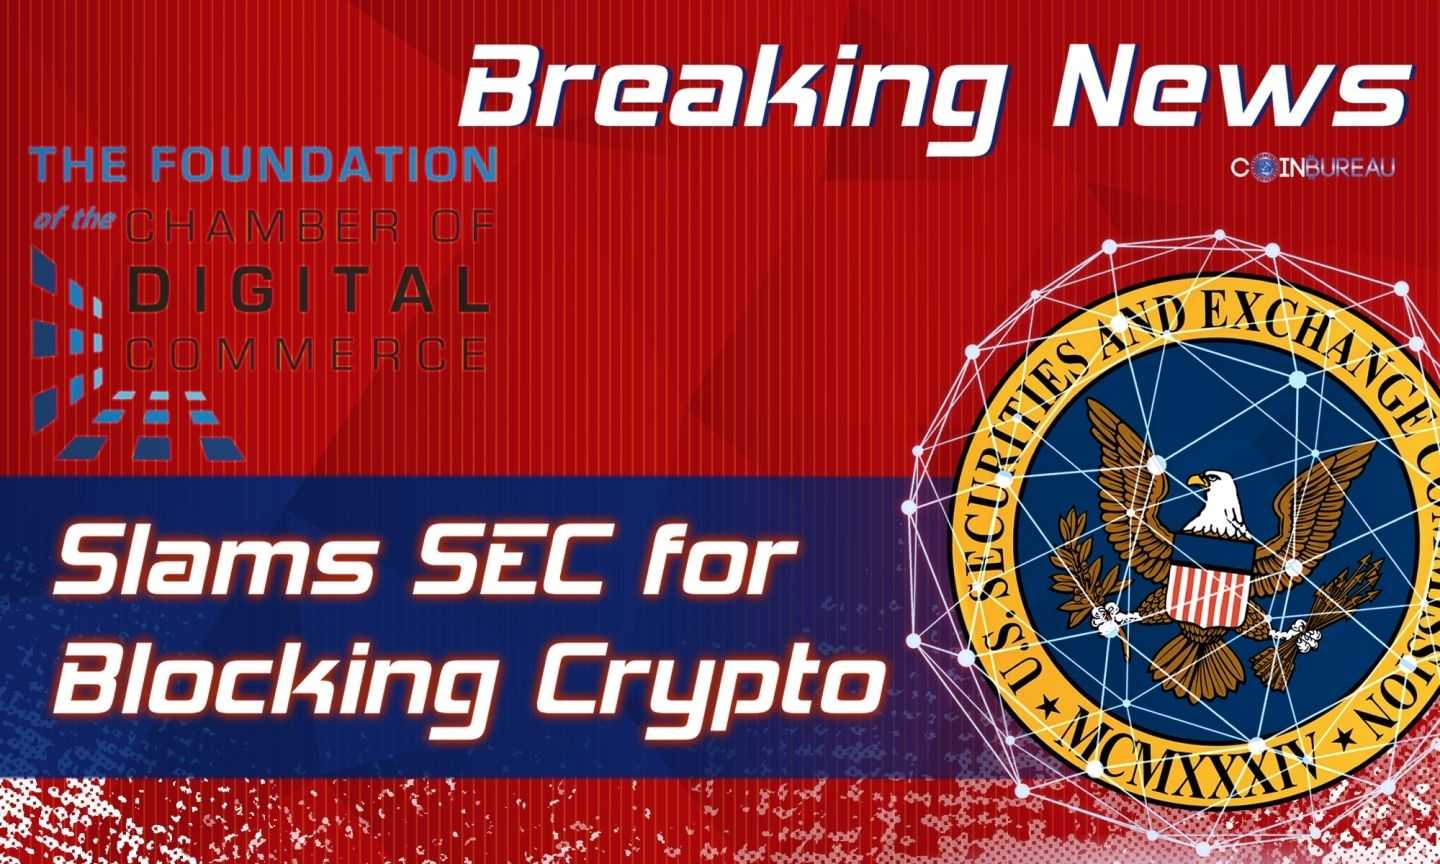 Chamber of Digital Commerce Slams SEC for Blocking Crypto and Preventing Explosion of Wealth: Report